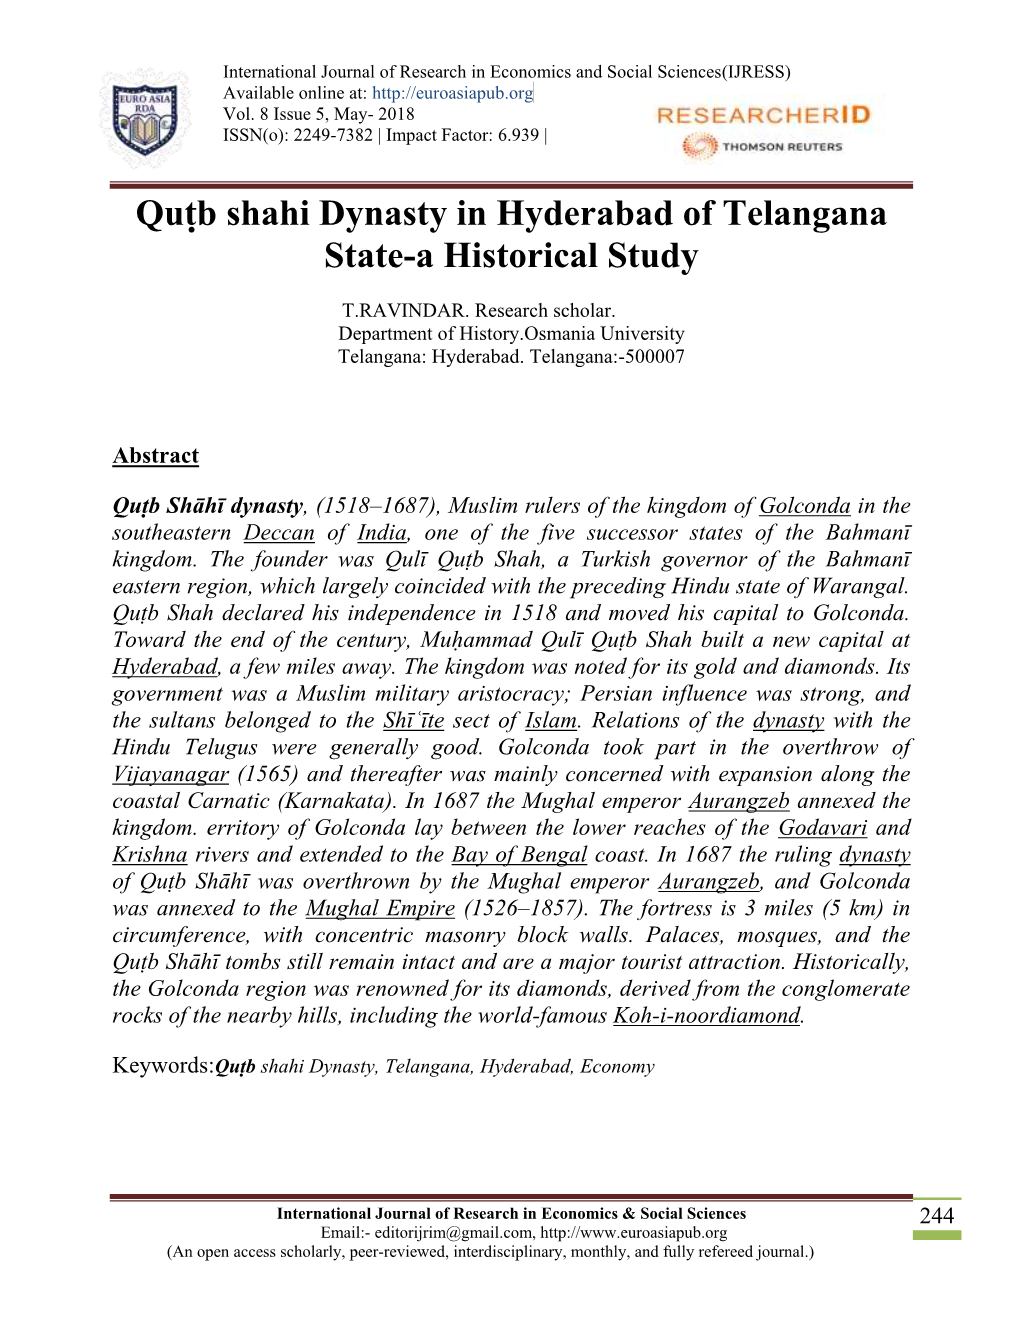 Quṭb Shahi Dynasty in Hyderabad of Telangana State-A Historical Study